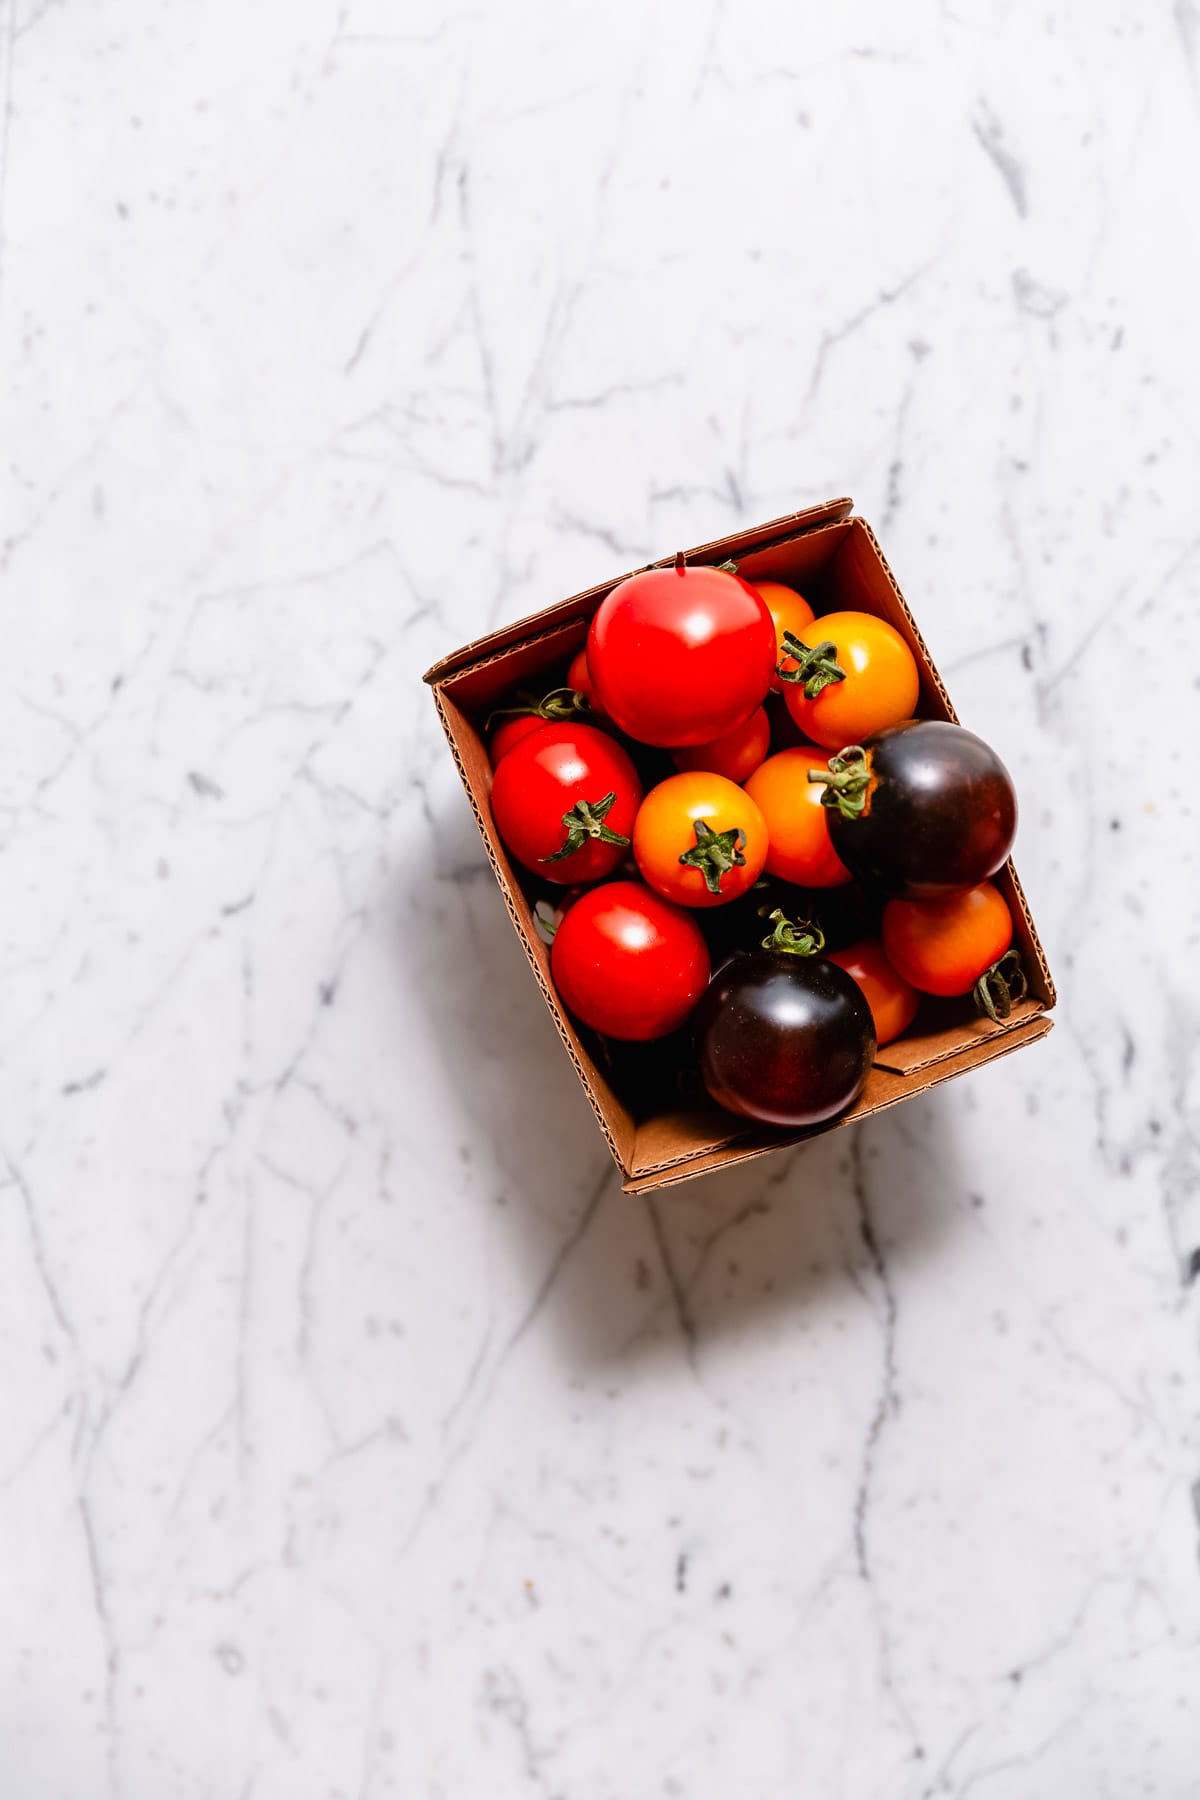 Mixed cherry tomatoes in a cardboard container on a marble surface.